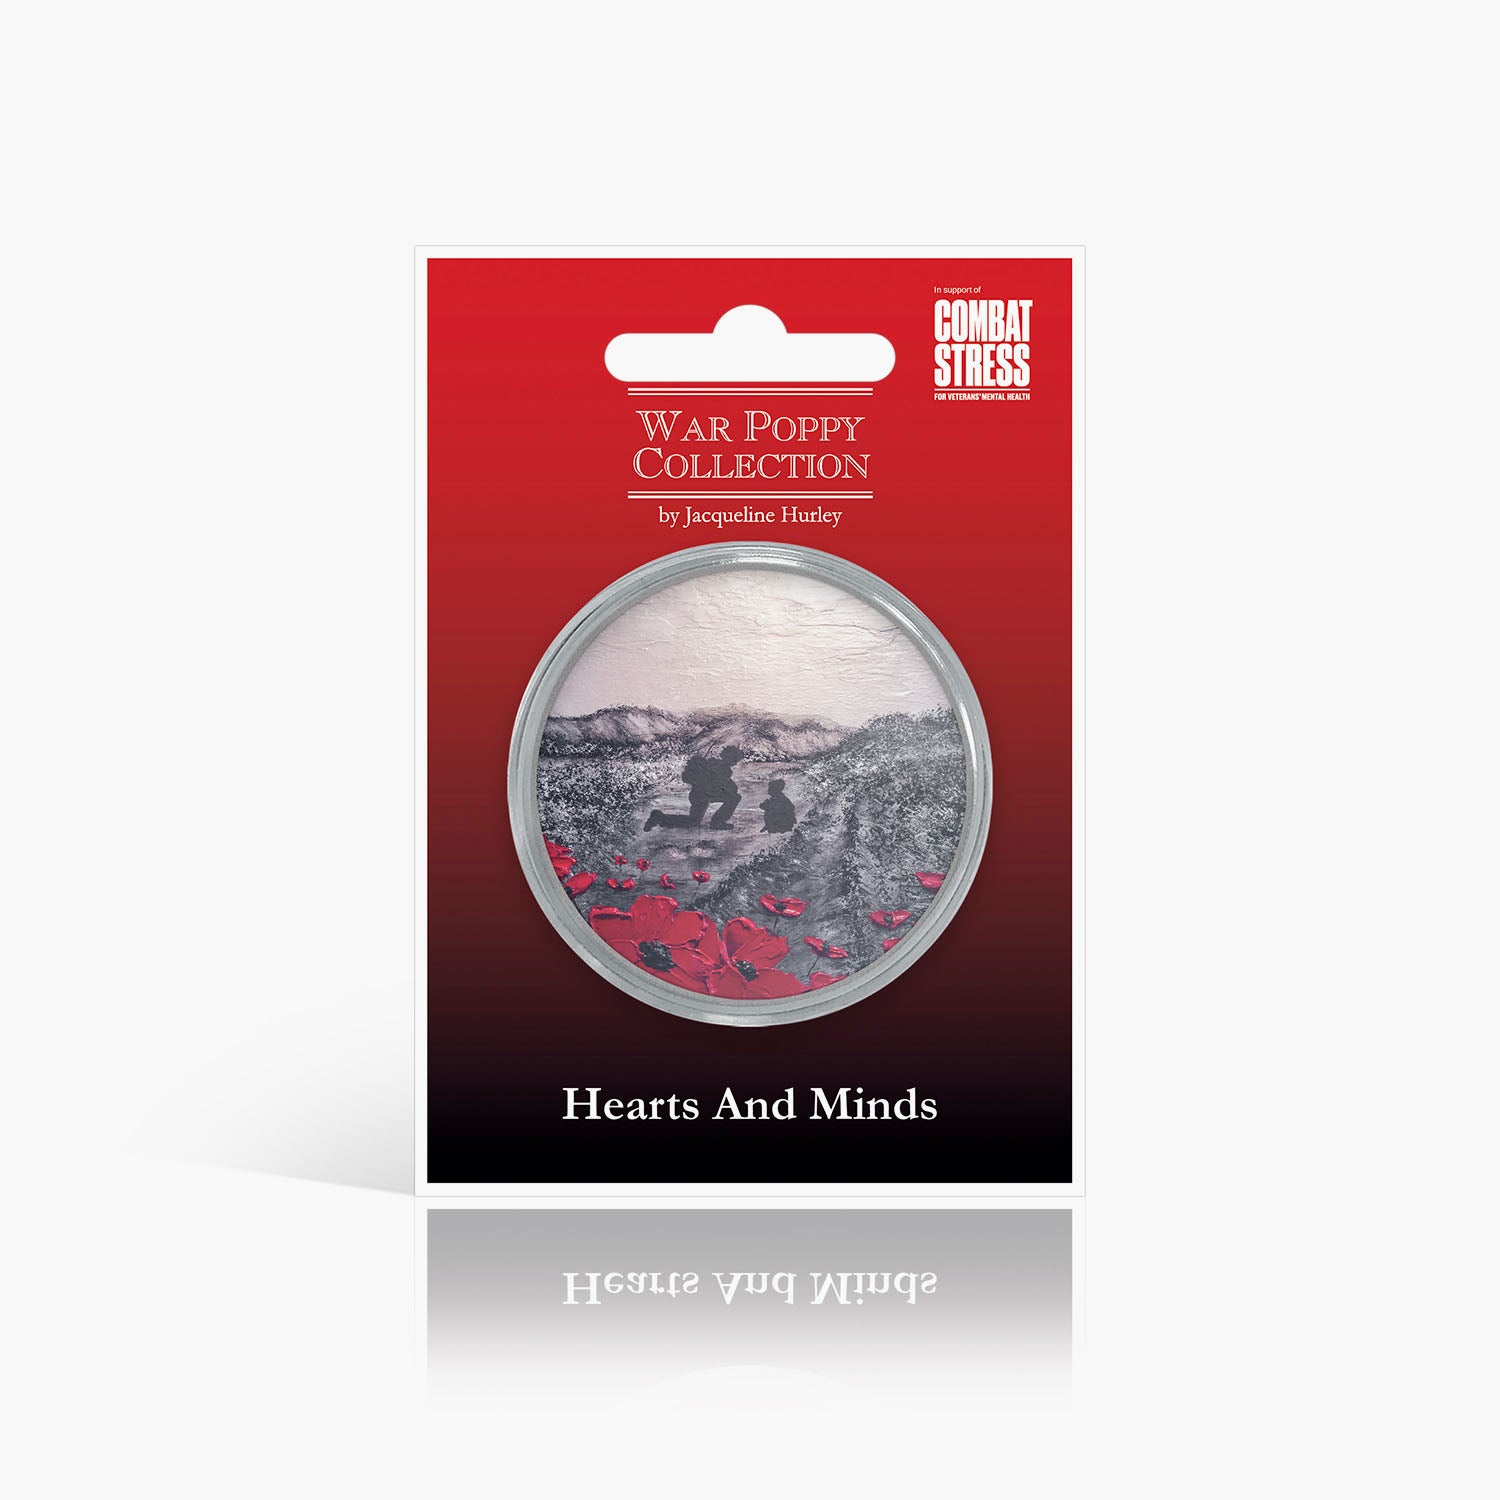 Hearts And Minds Silver-Plated Commemorative